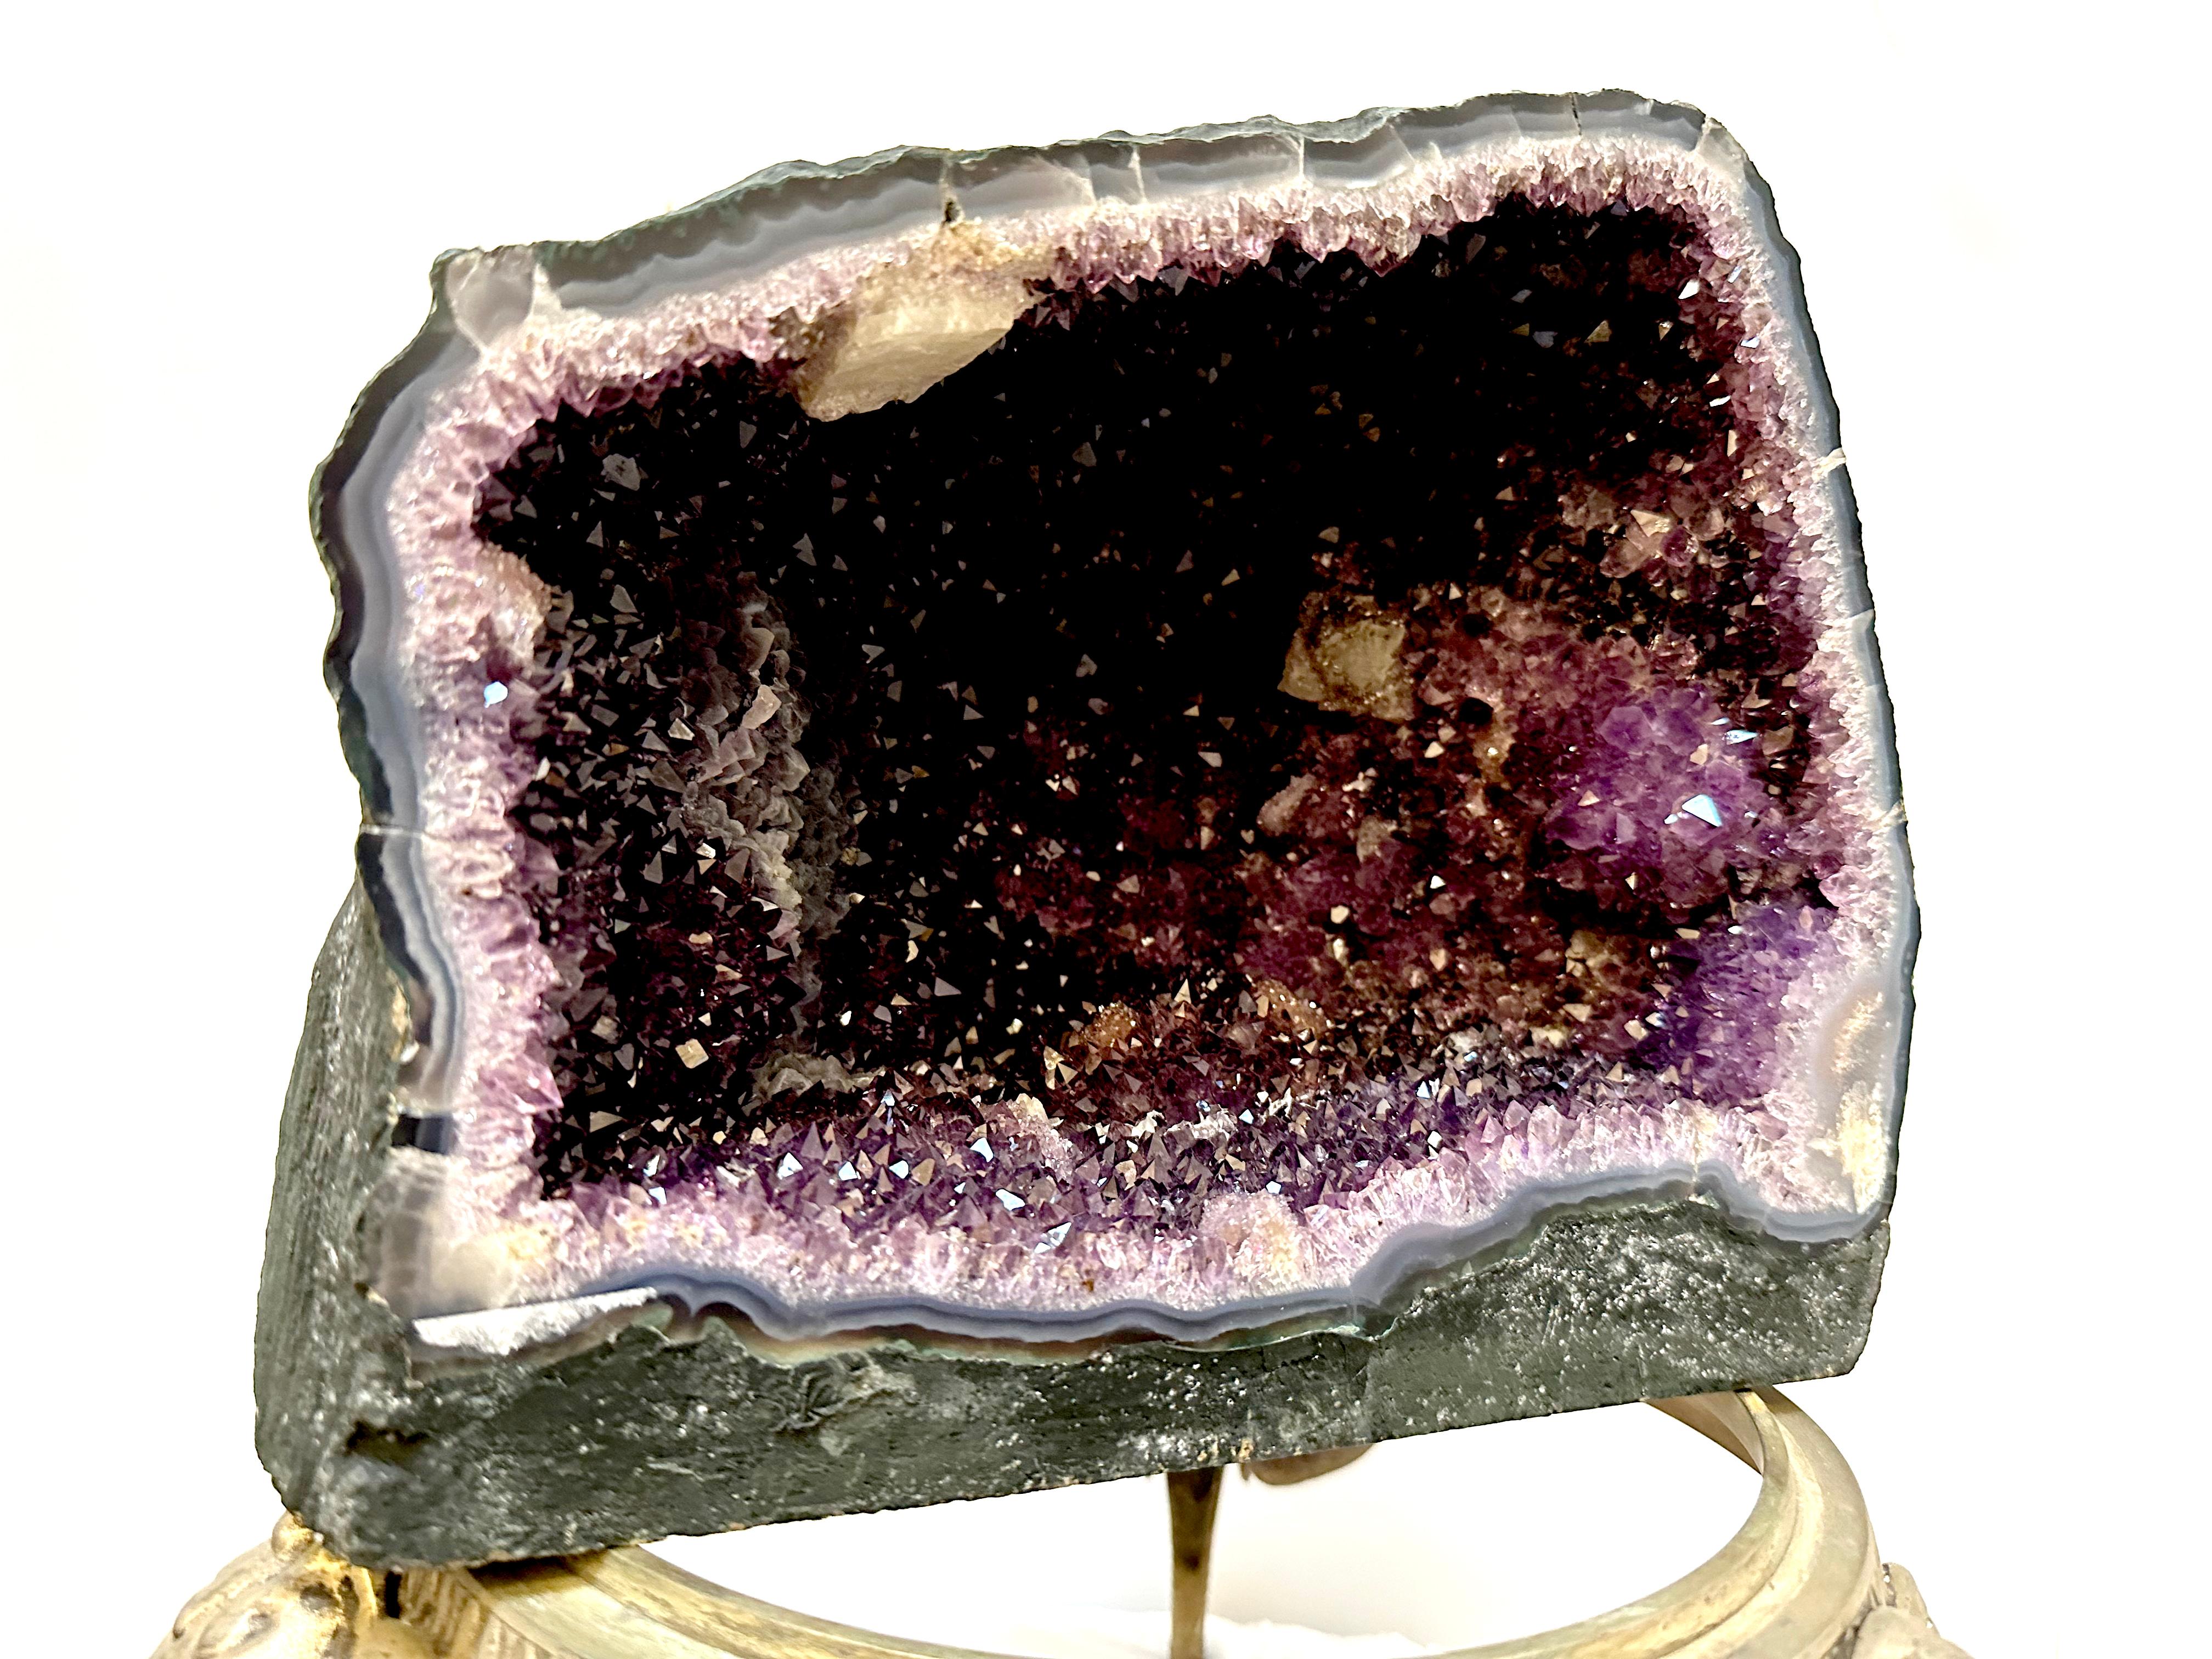 An impressive deep purple amethyst geode will lend itself to office or home decor. This is a great ornamental specimen for an office or public space display. It has calcite formations as well as areas of possible colorless quartz. 
This piece came